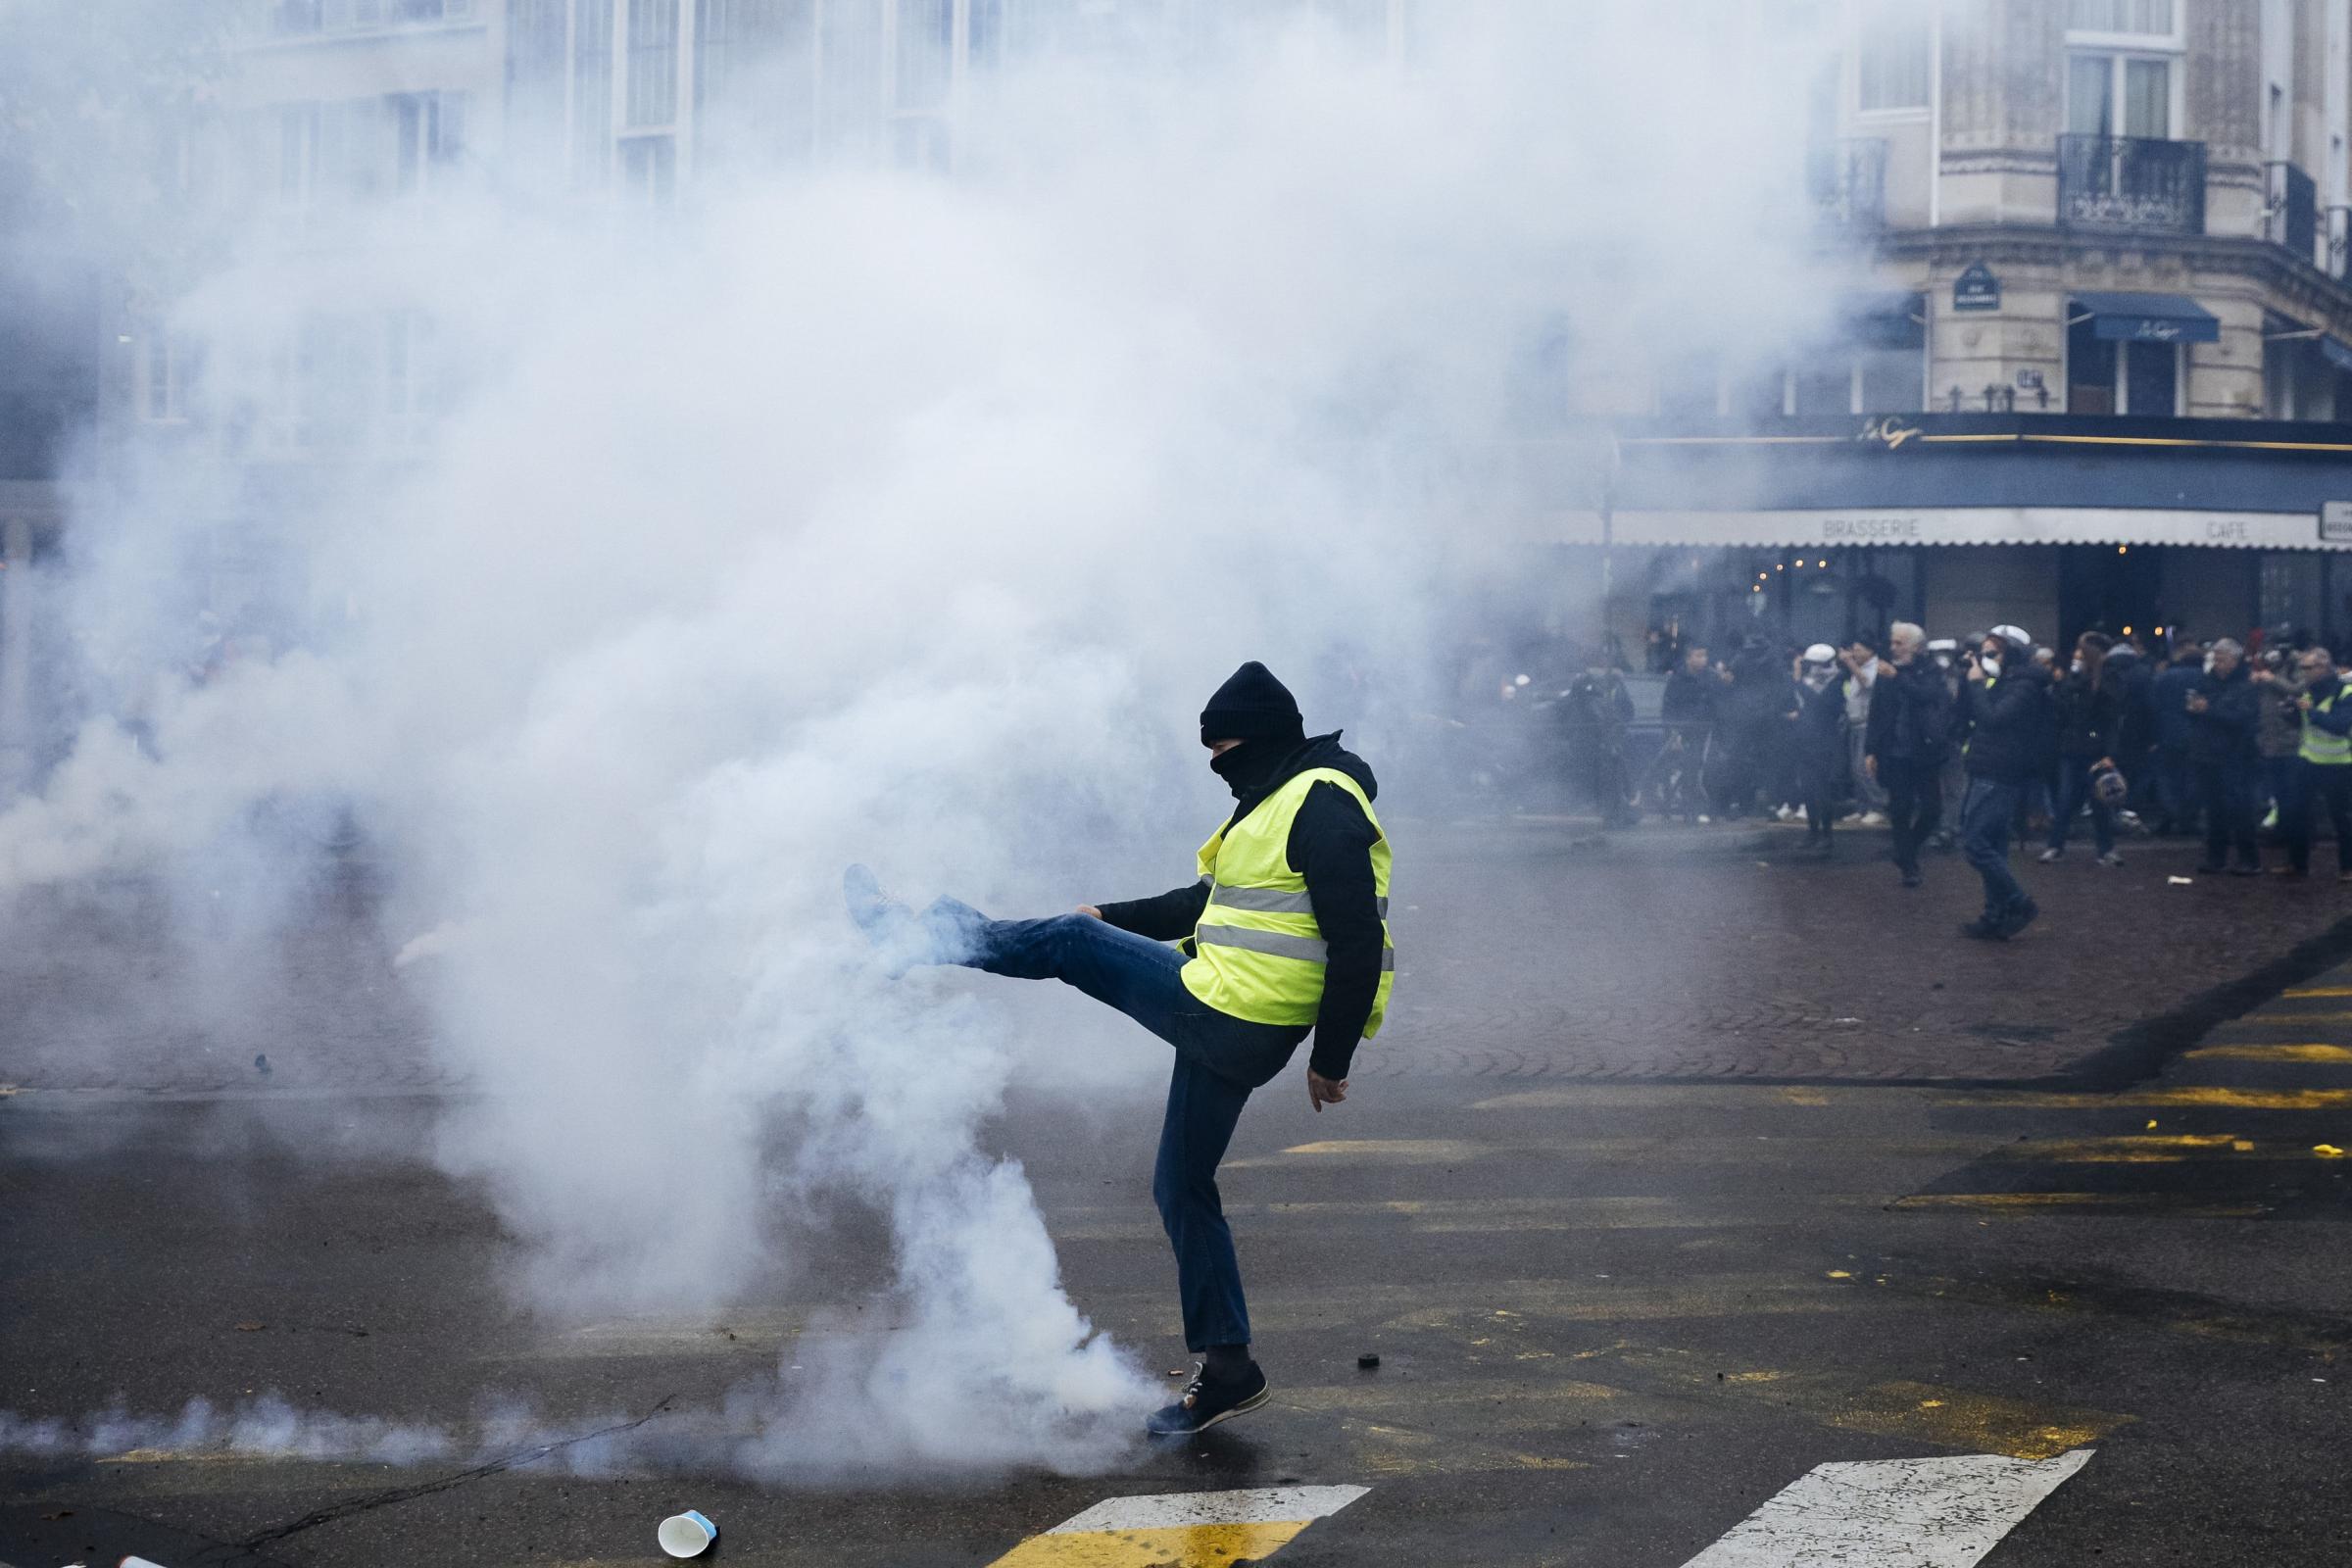 Tear gas fired by police as yellow vest protesters mark anniversary - Ealing Times